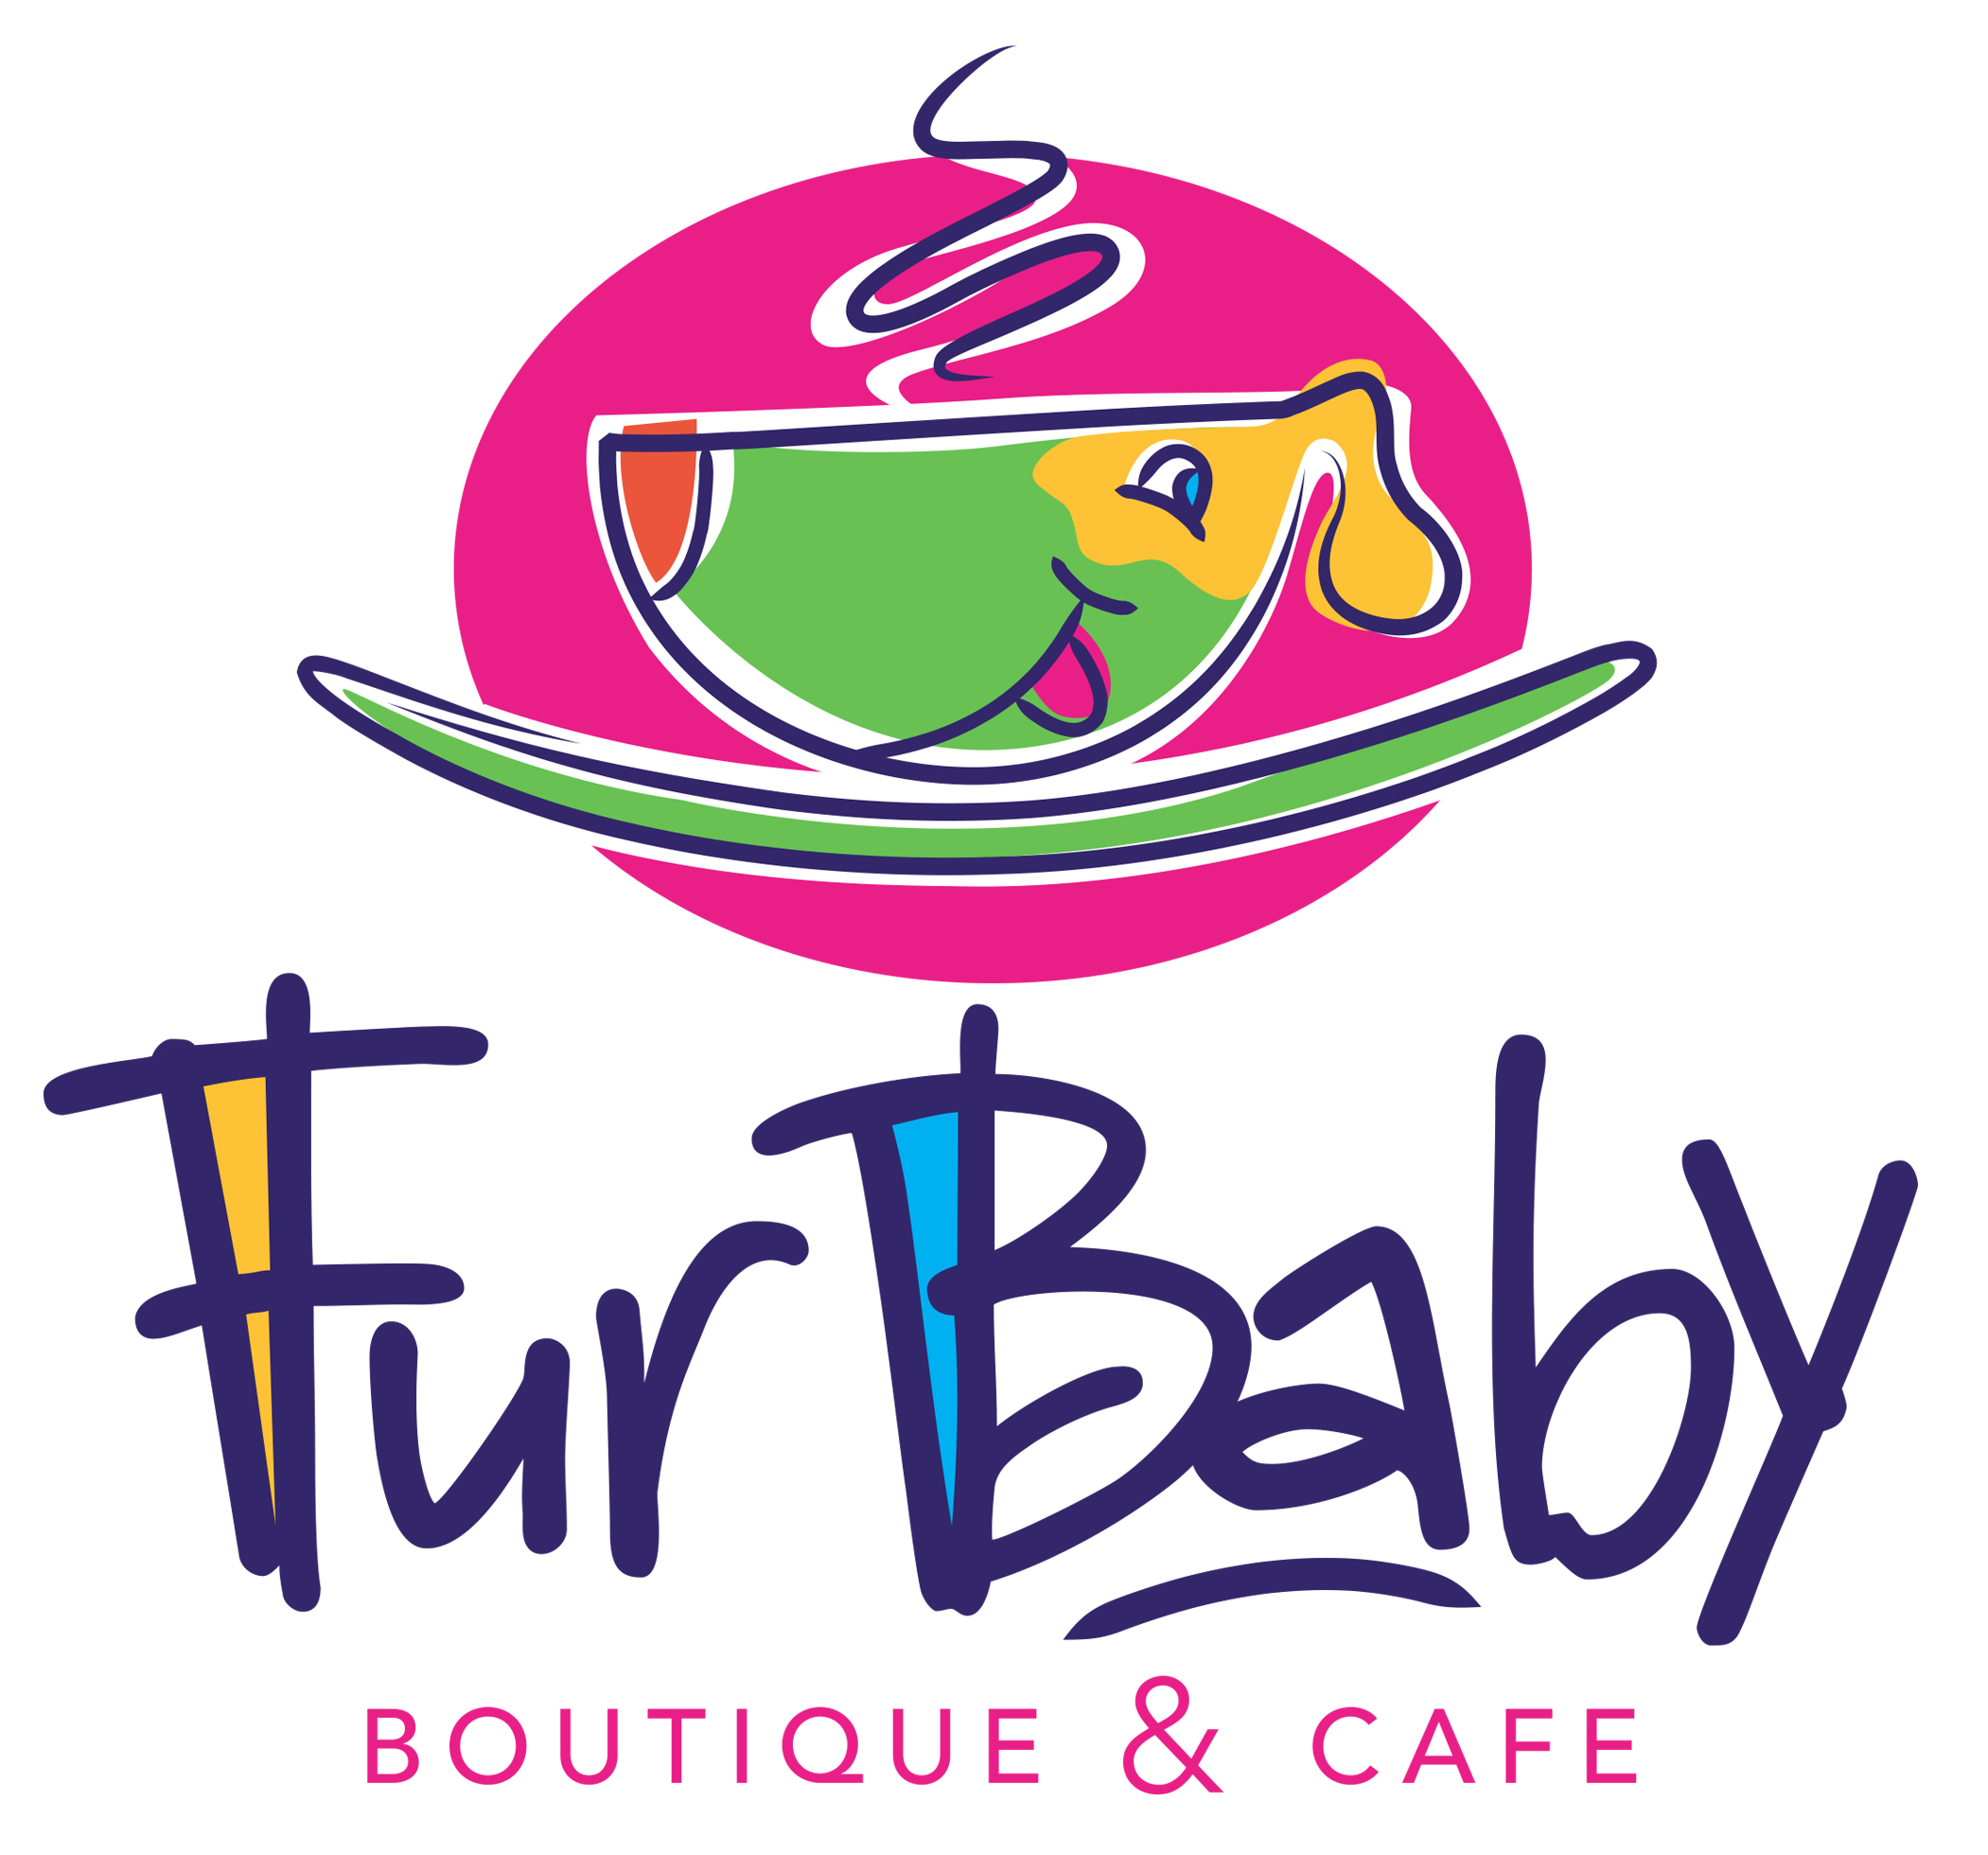 FurBaby Boutique and Cafe